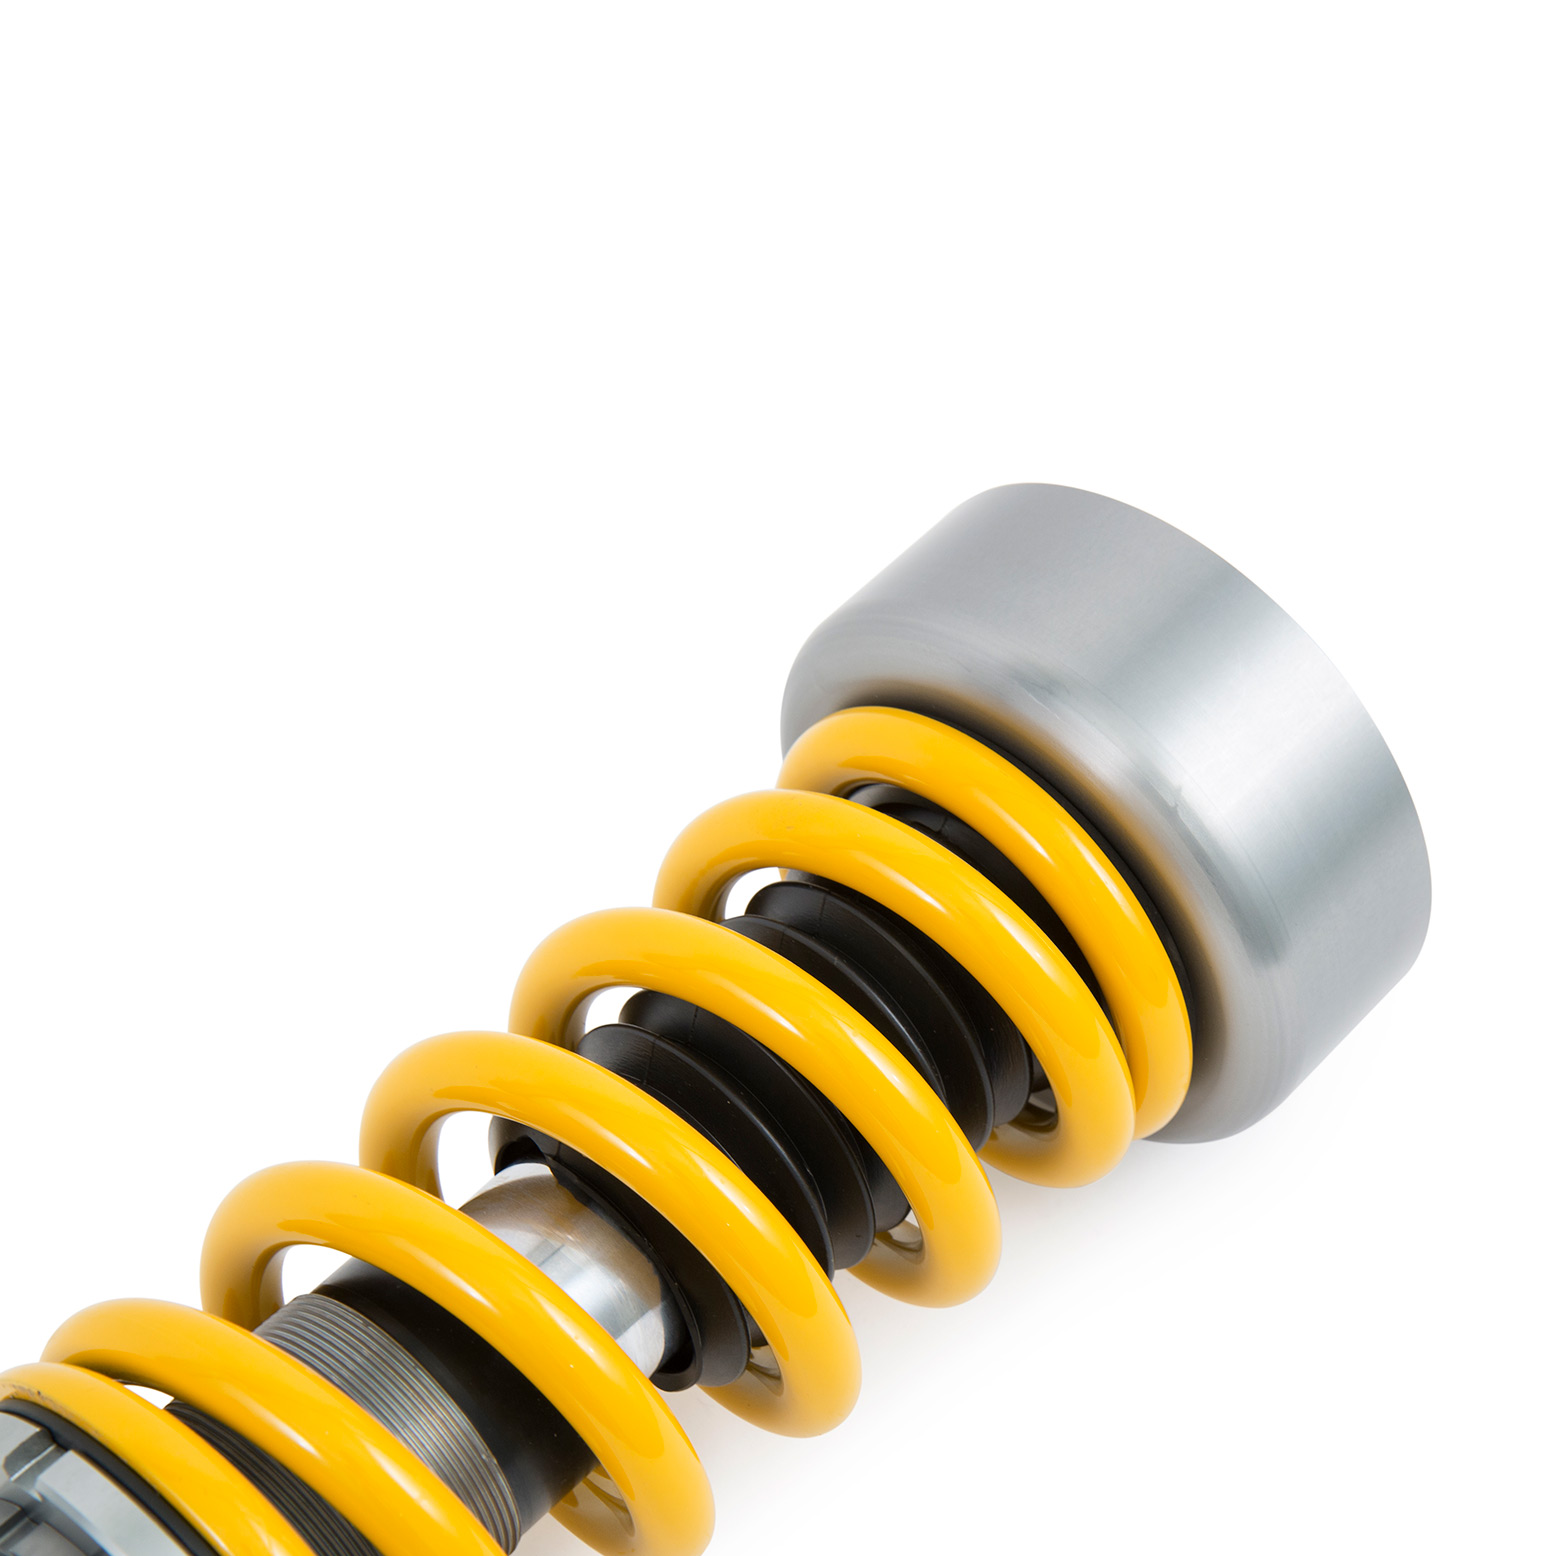 Ohlins Road and Track Coilovers for Ford Mustang EcoBoost 2015-2018